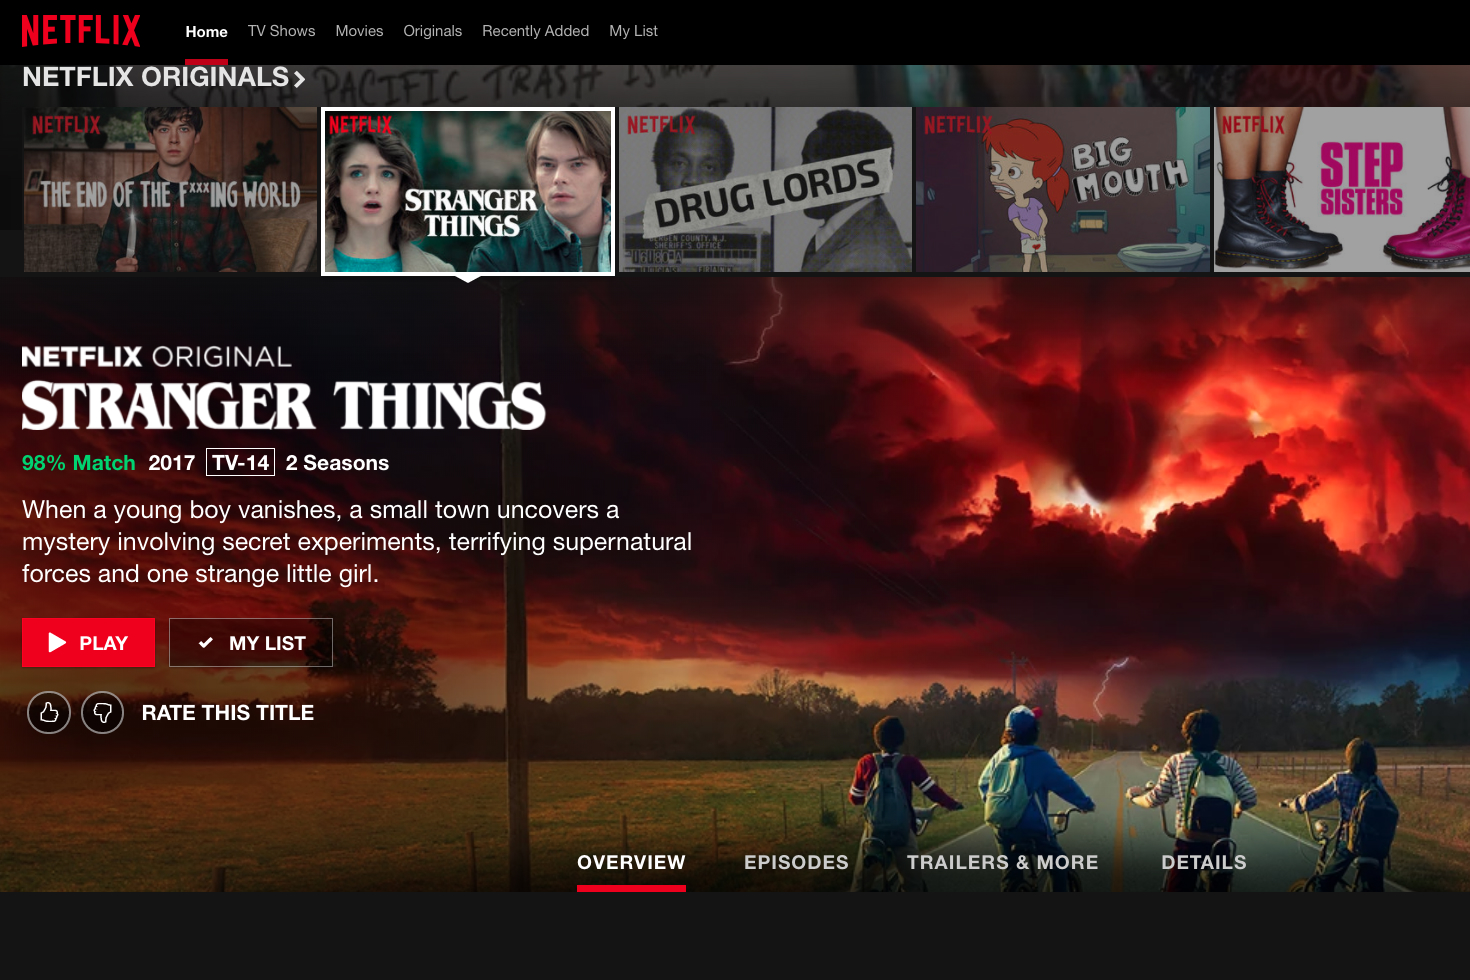 The Strangers Things title screen on Netflix.